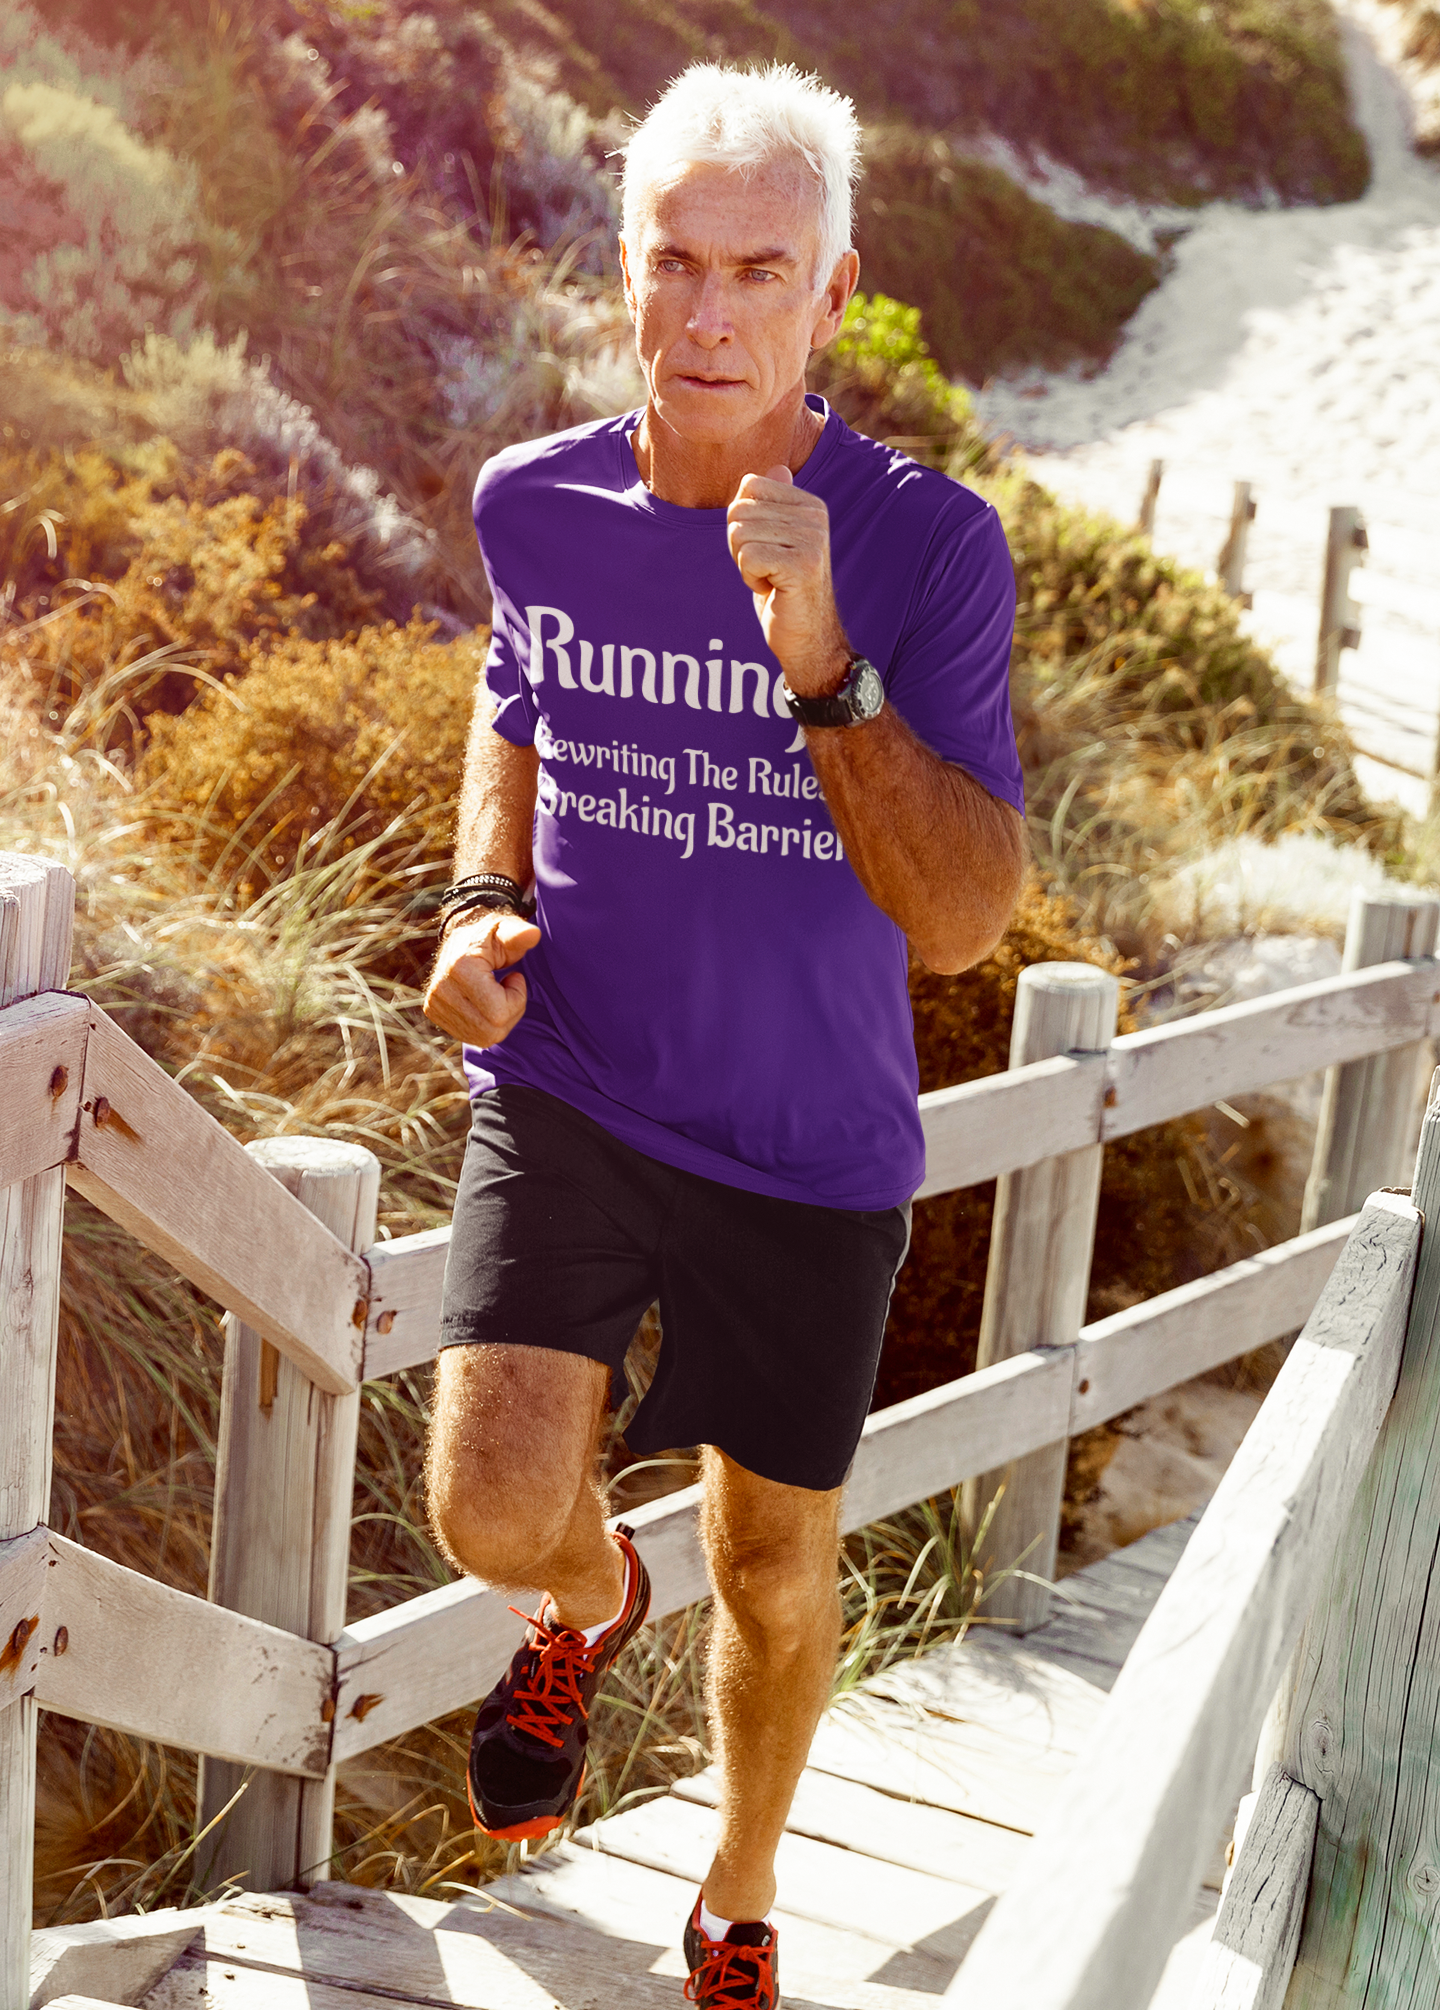 Men's Inspirational Top Running rewriting the rules, breaking barriers